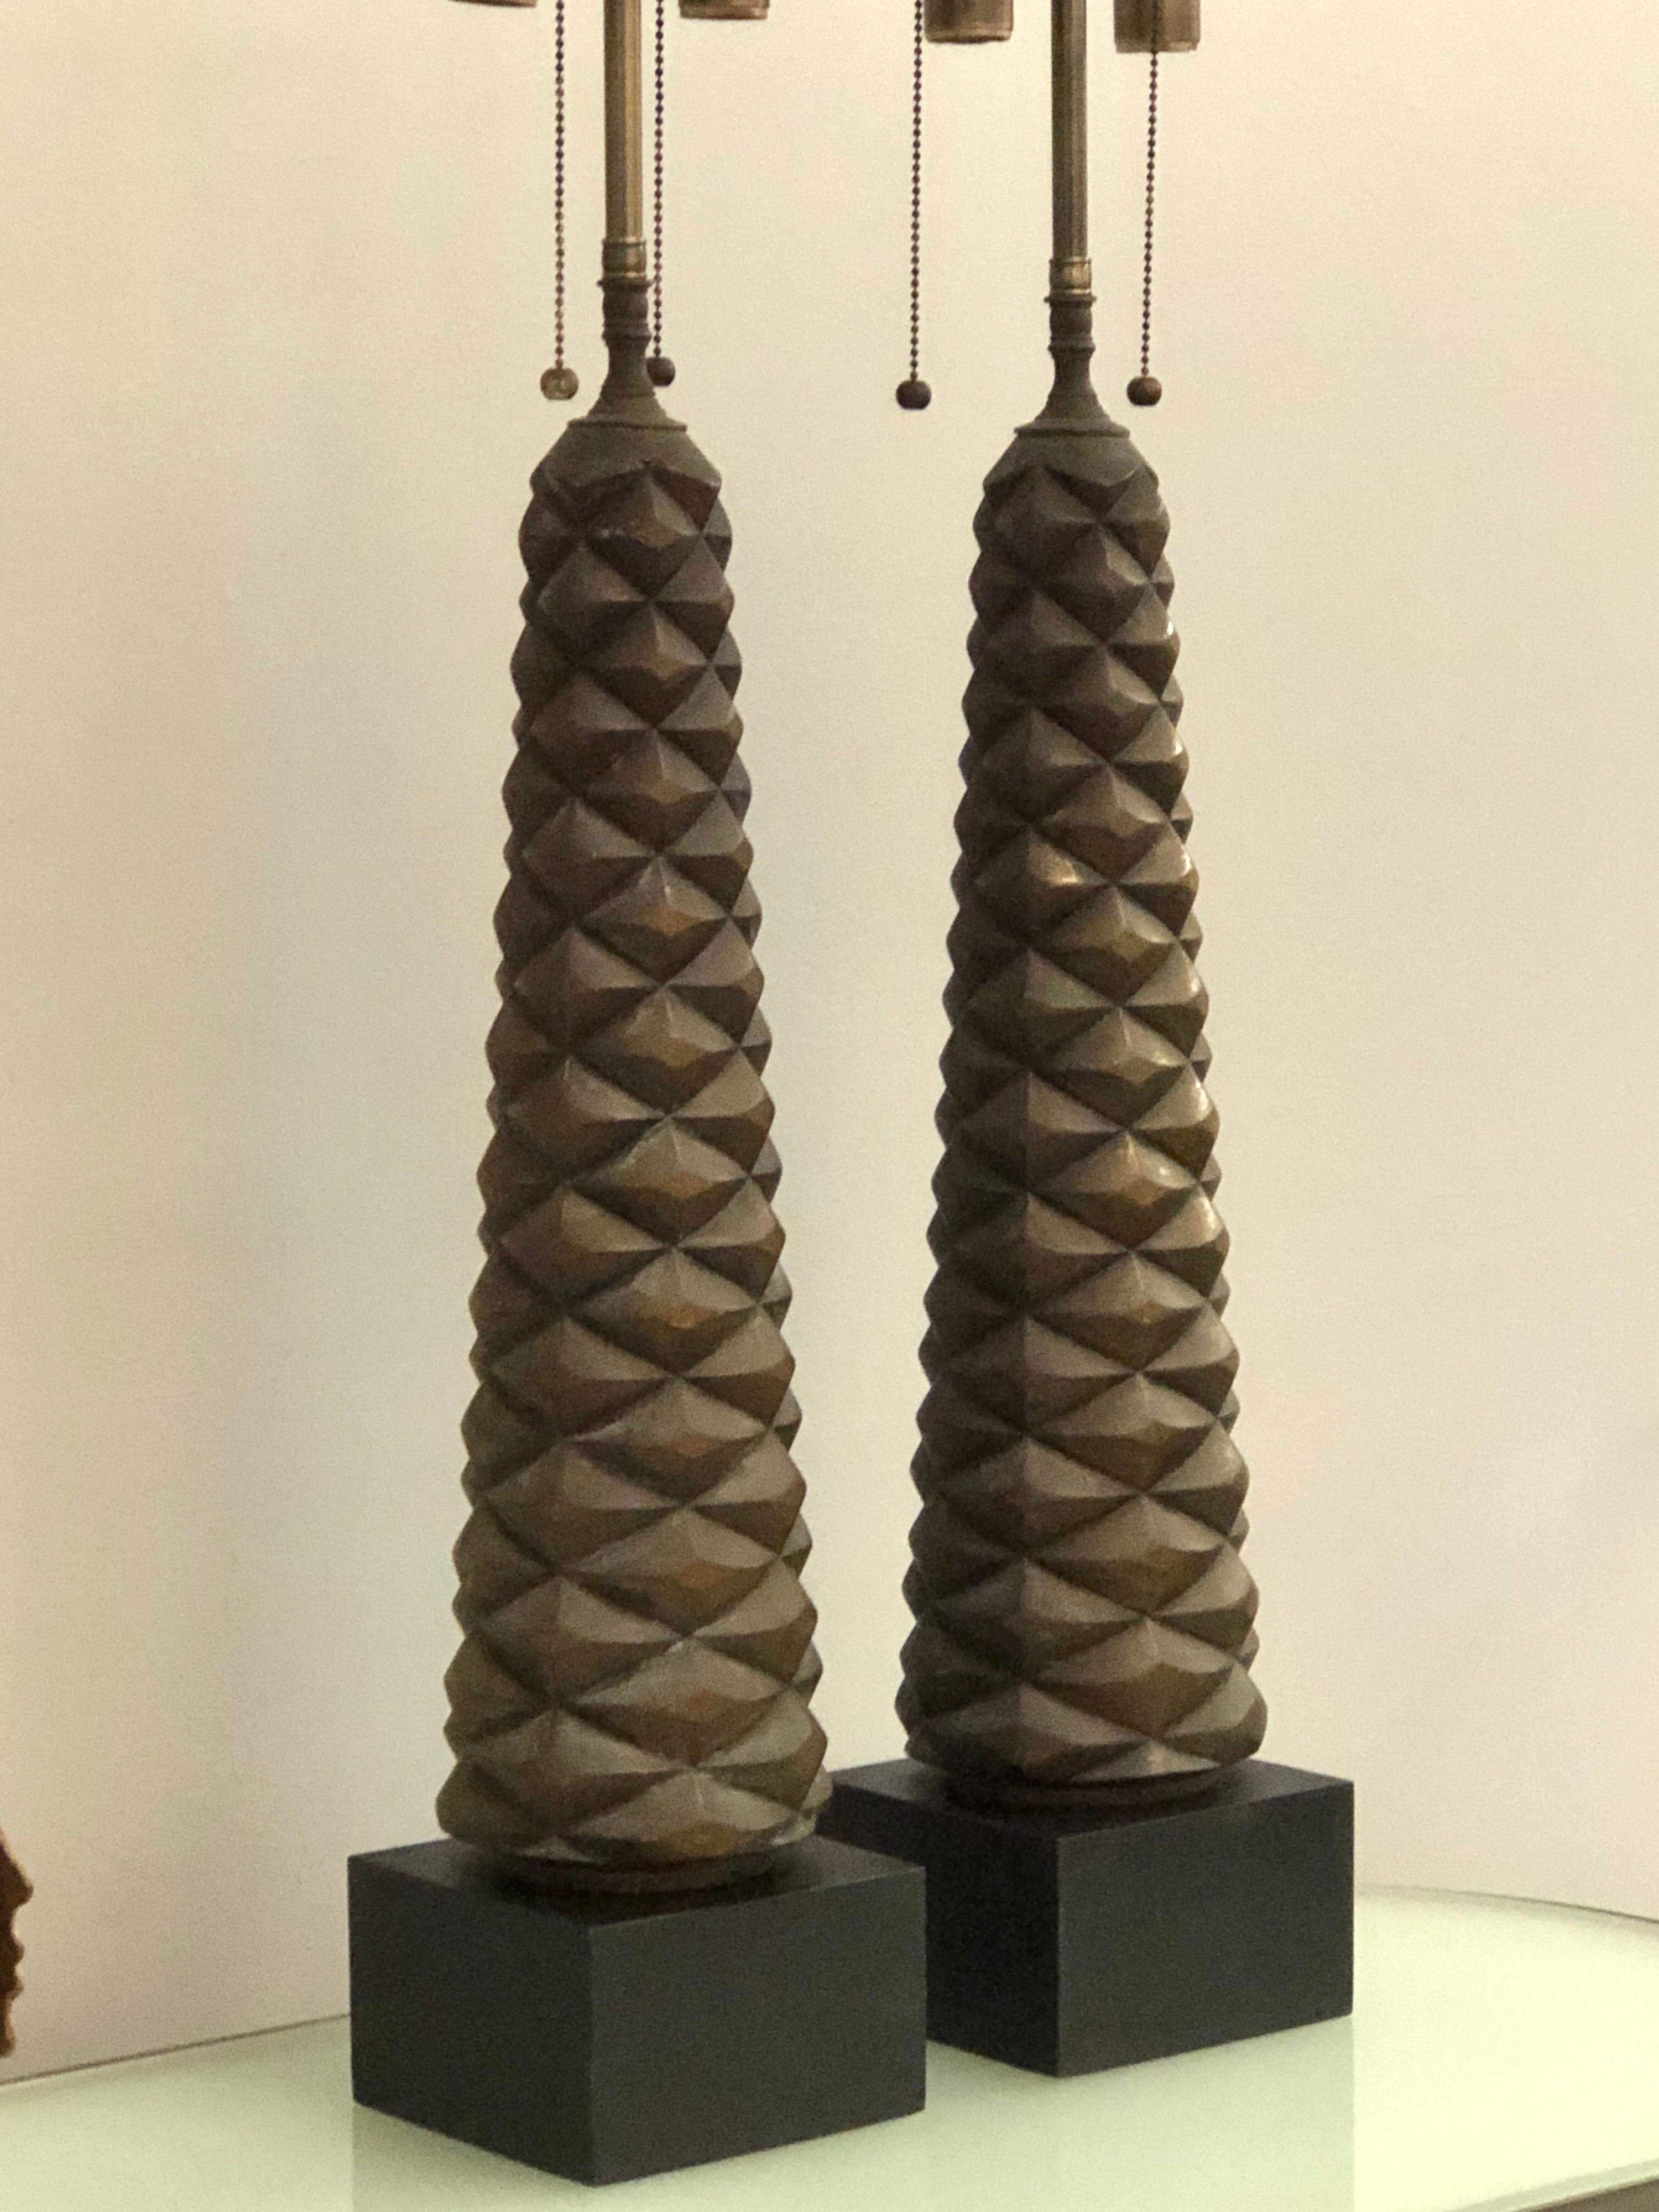 A pair of stunning table lamps. The base is carved in an almost geometric pattern with an organic flair that resembles the trunk of the date palm tree. They have a burnished gilt finish that has darken with age.